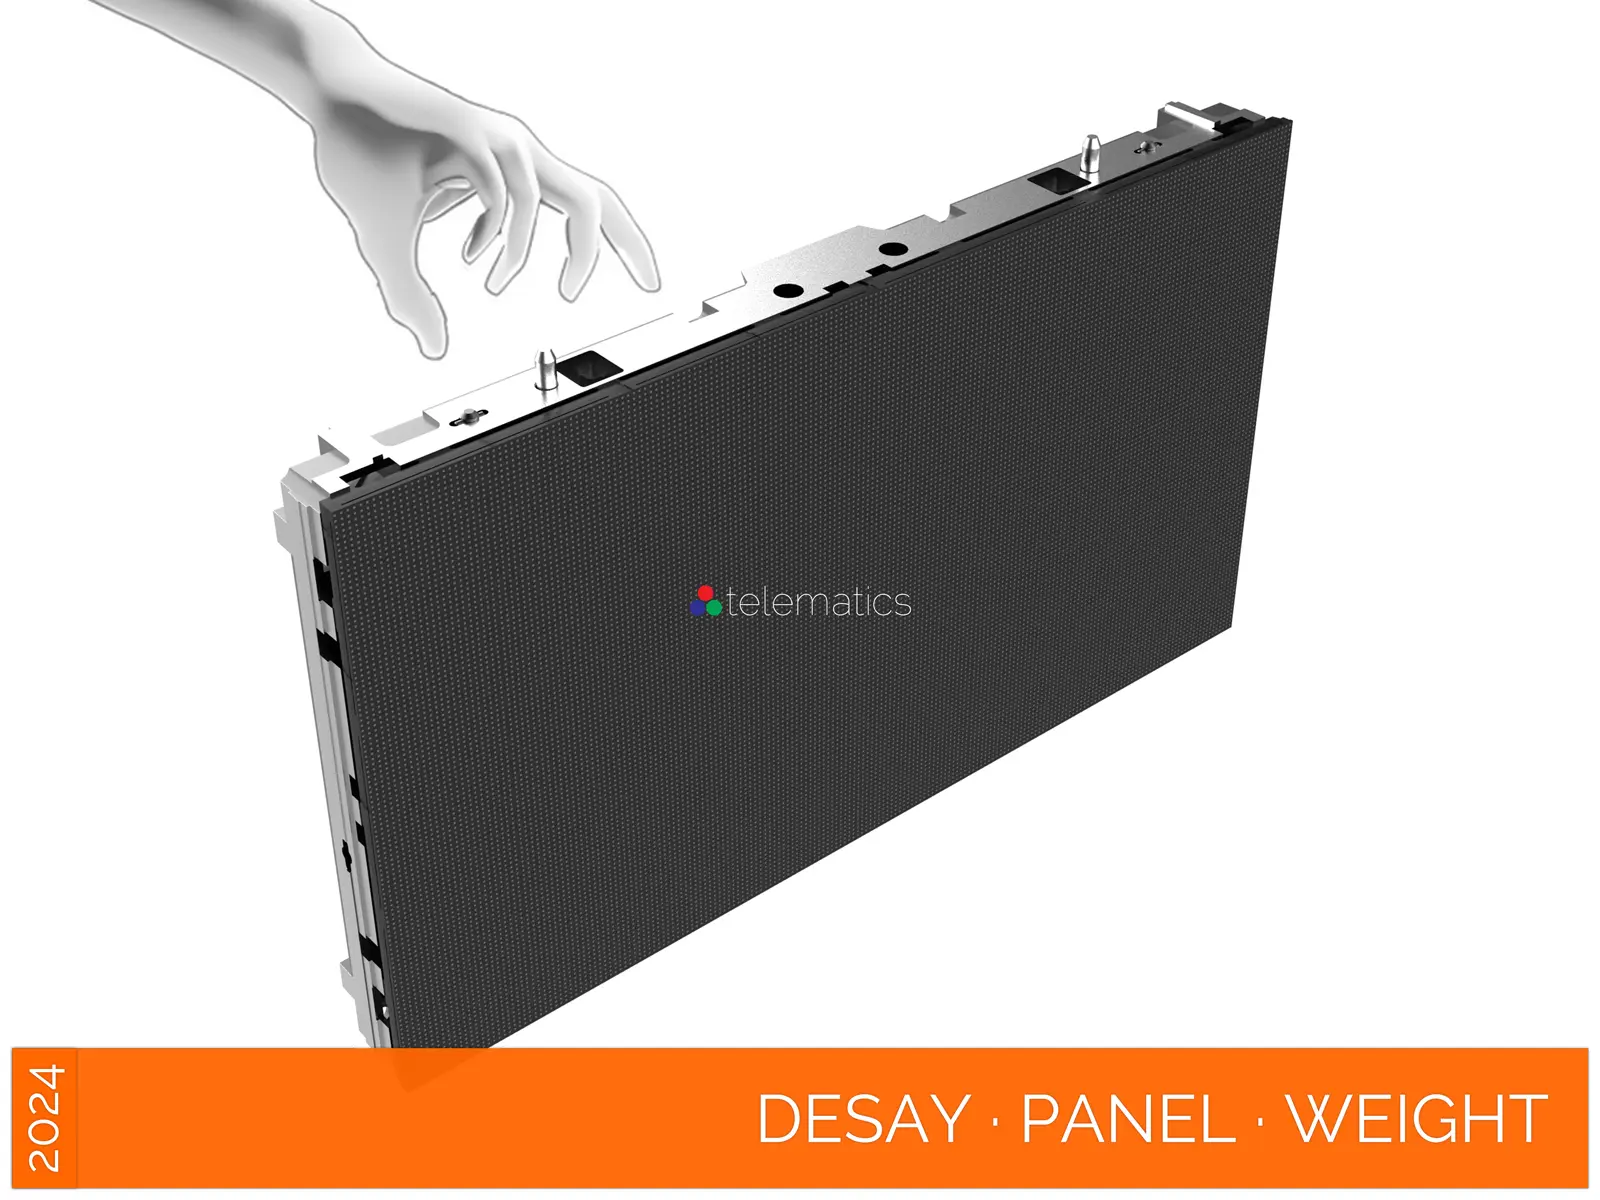 Desay · Series · Direct View LED Display Panel · Full Pixel Range · Panel Dimensions · Width · Height · Depth · Weight · NovaStar COEX MX CX · Vision Management Platform · Viplex · review · price · cost